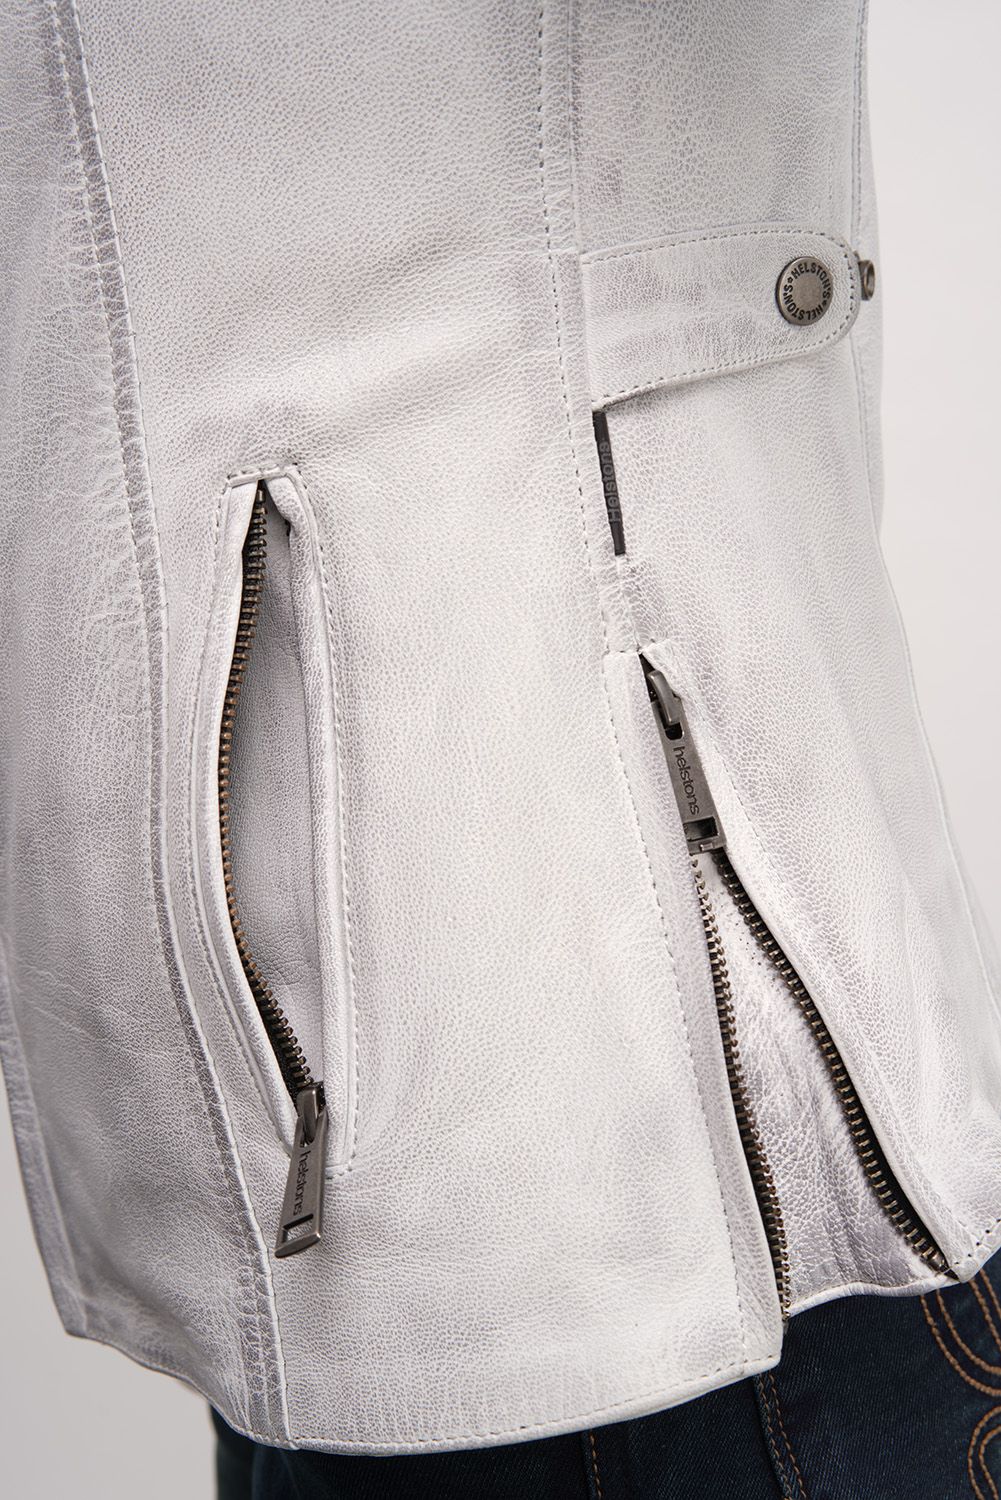 a close up of the side zipper of white leather jacket